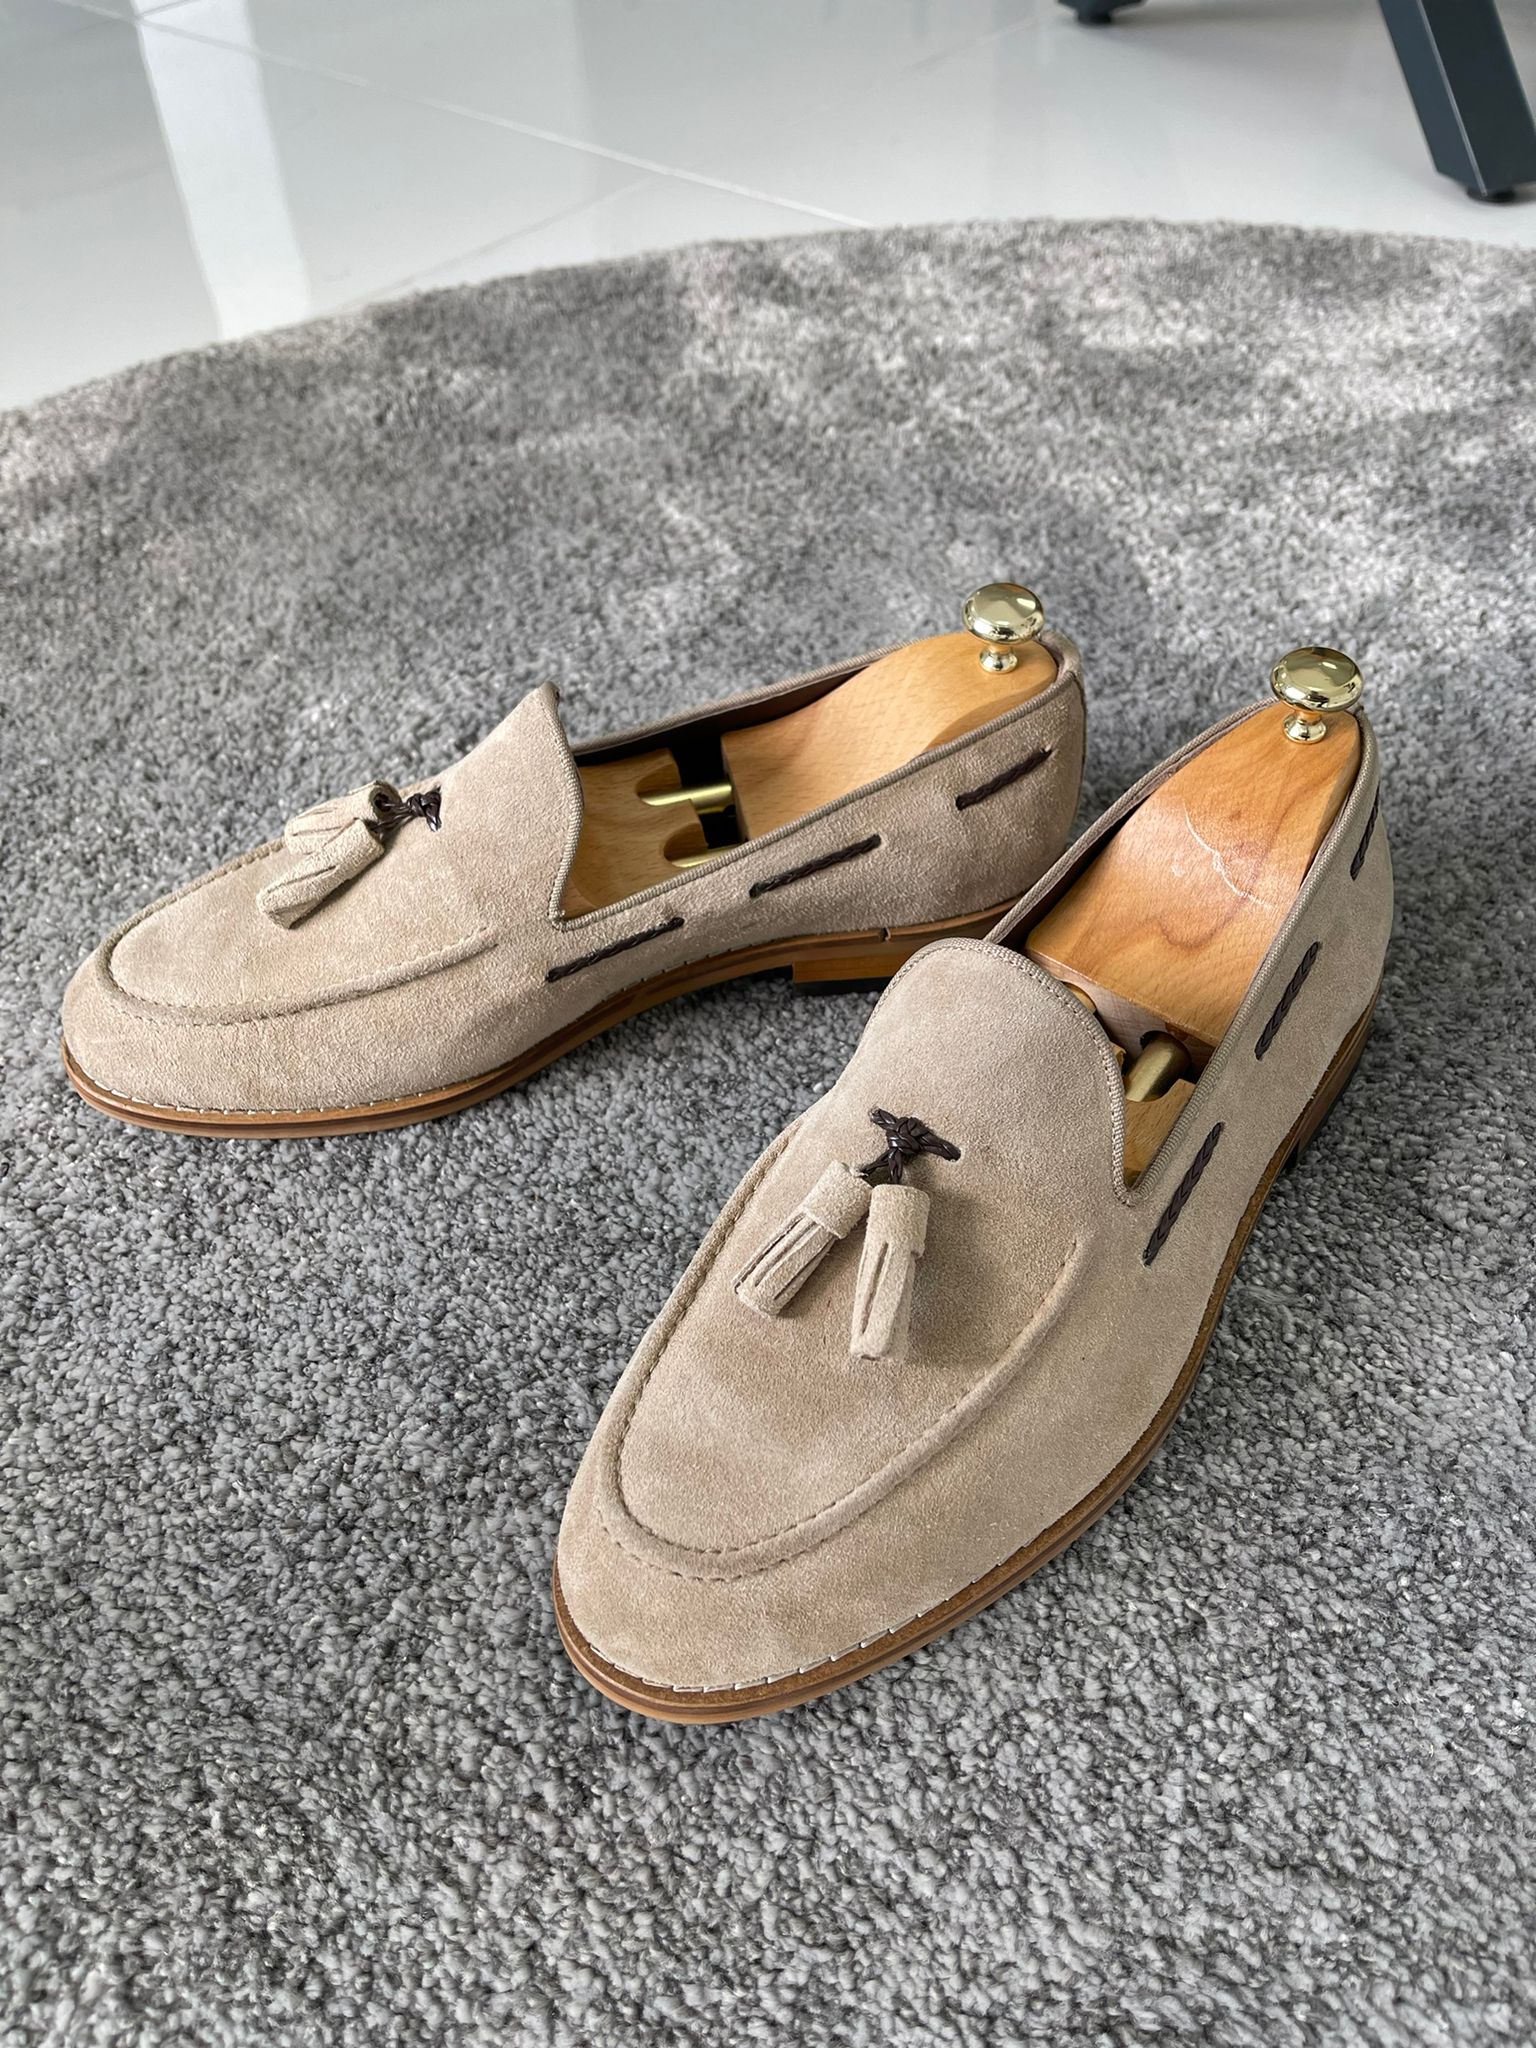 Reese Special Edition Beige Tasseled Suede Leather Shoes – MCR TAILOR